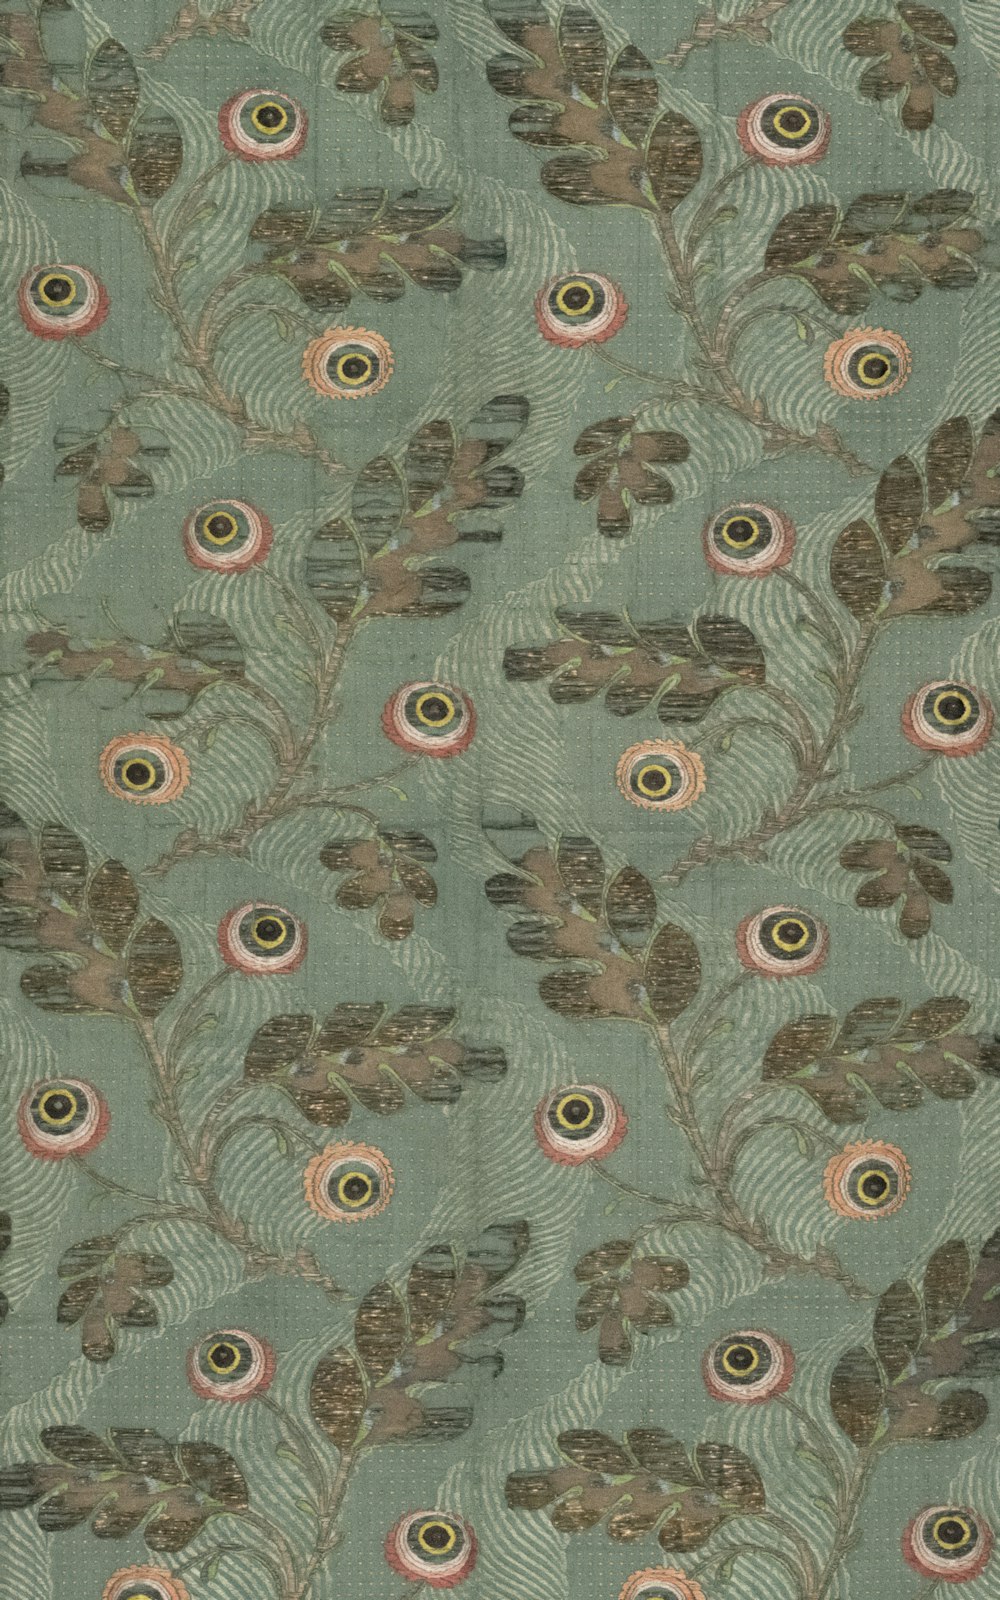 a pattern of feathers and leaves on a green background